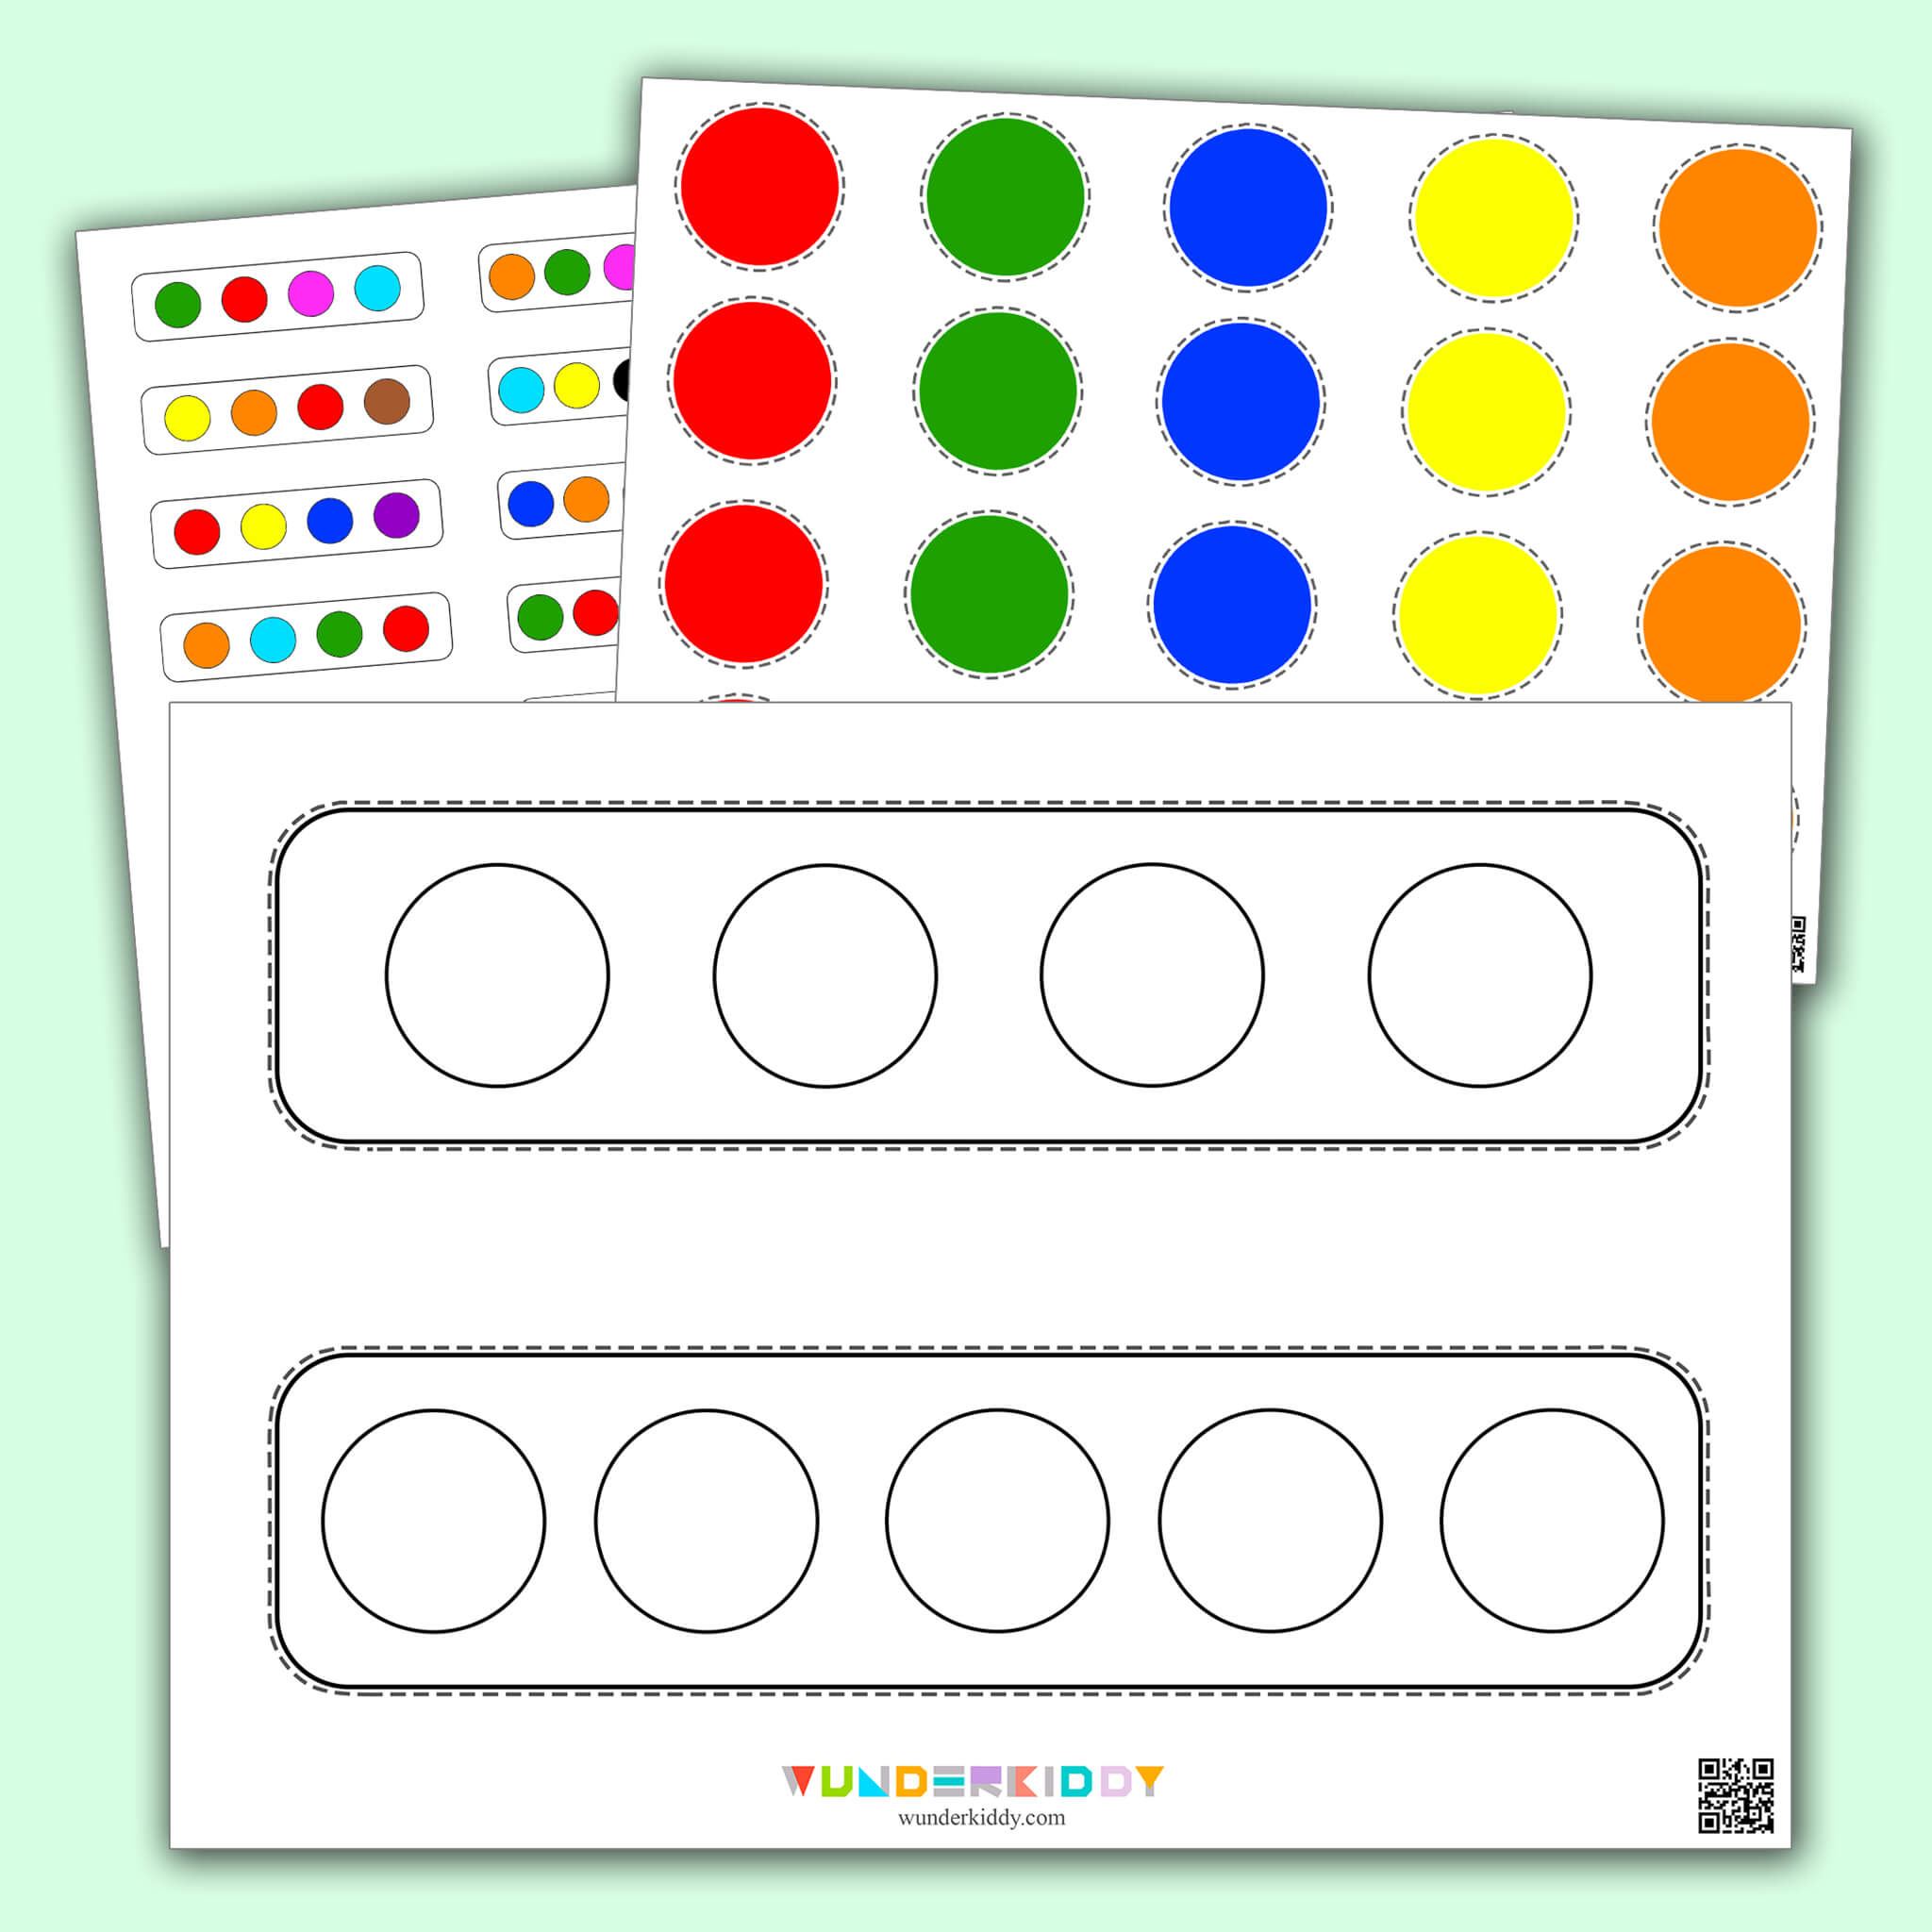 Simple Copy the Pattern Worksheet Multicolored circles